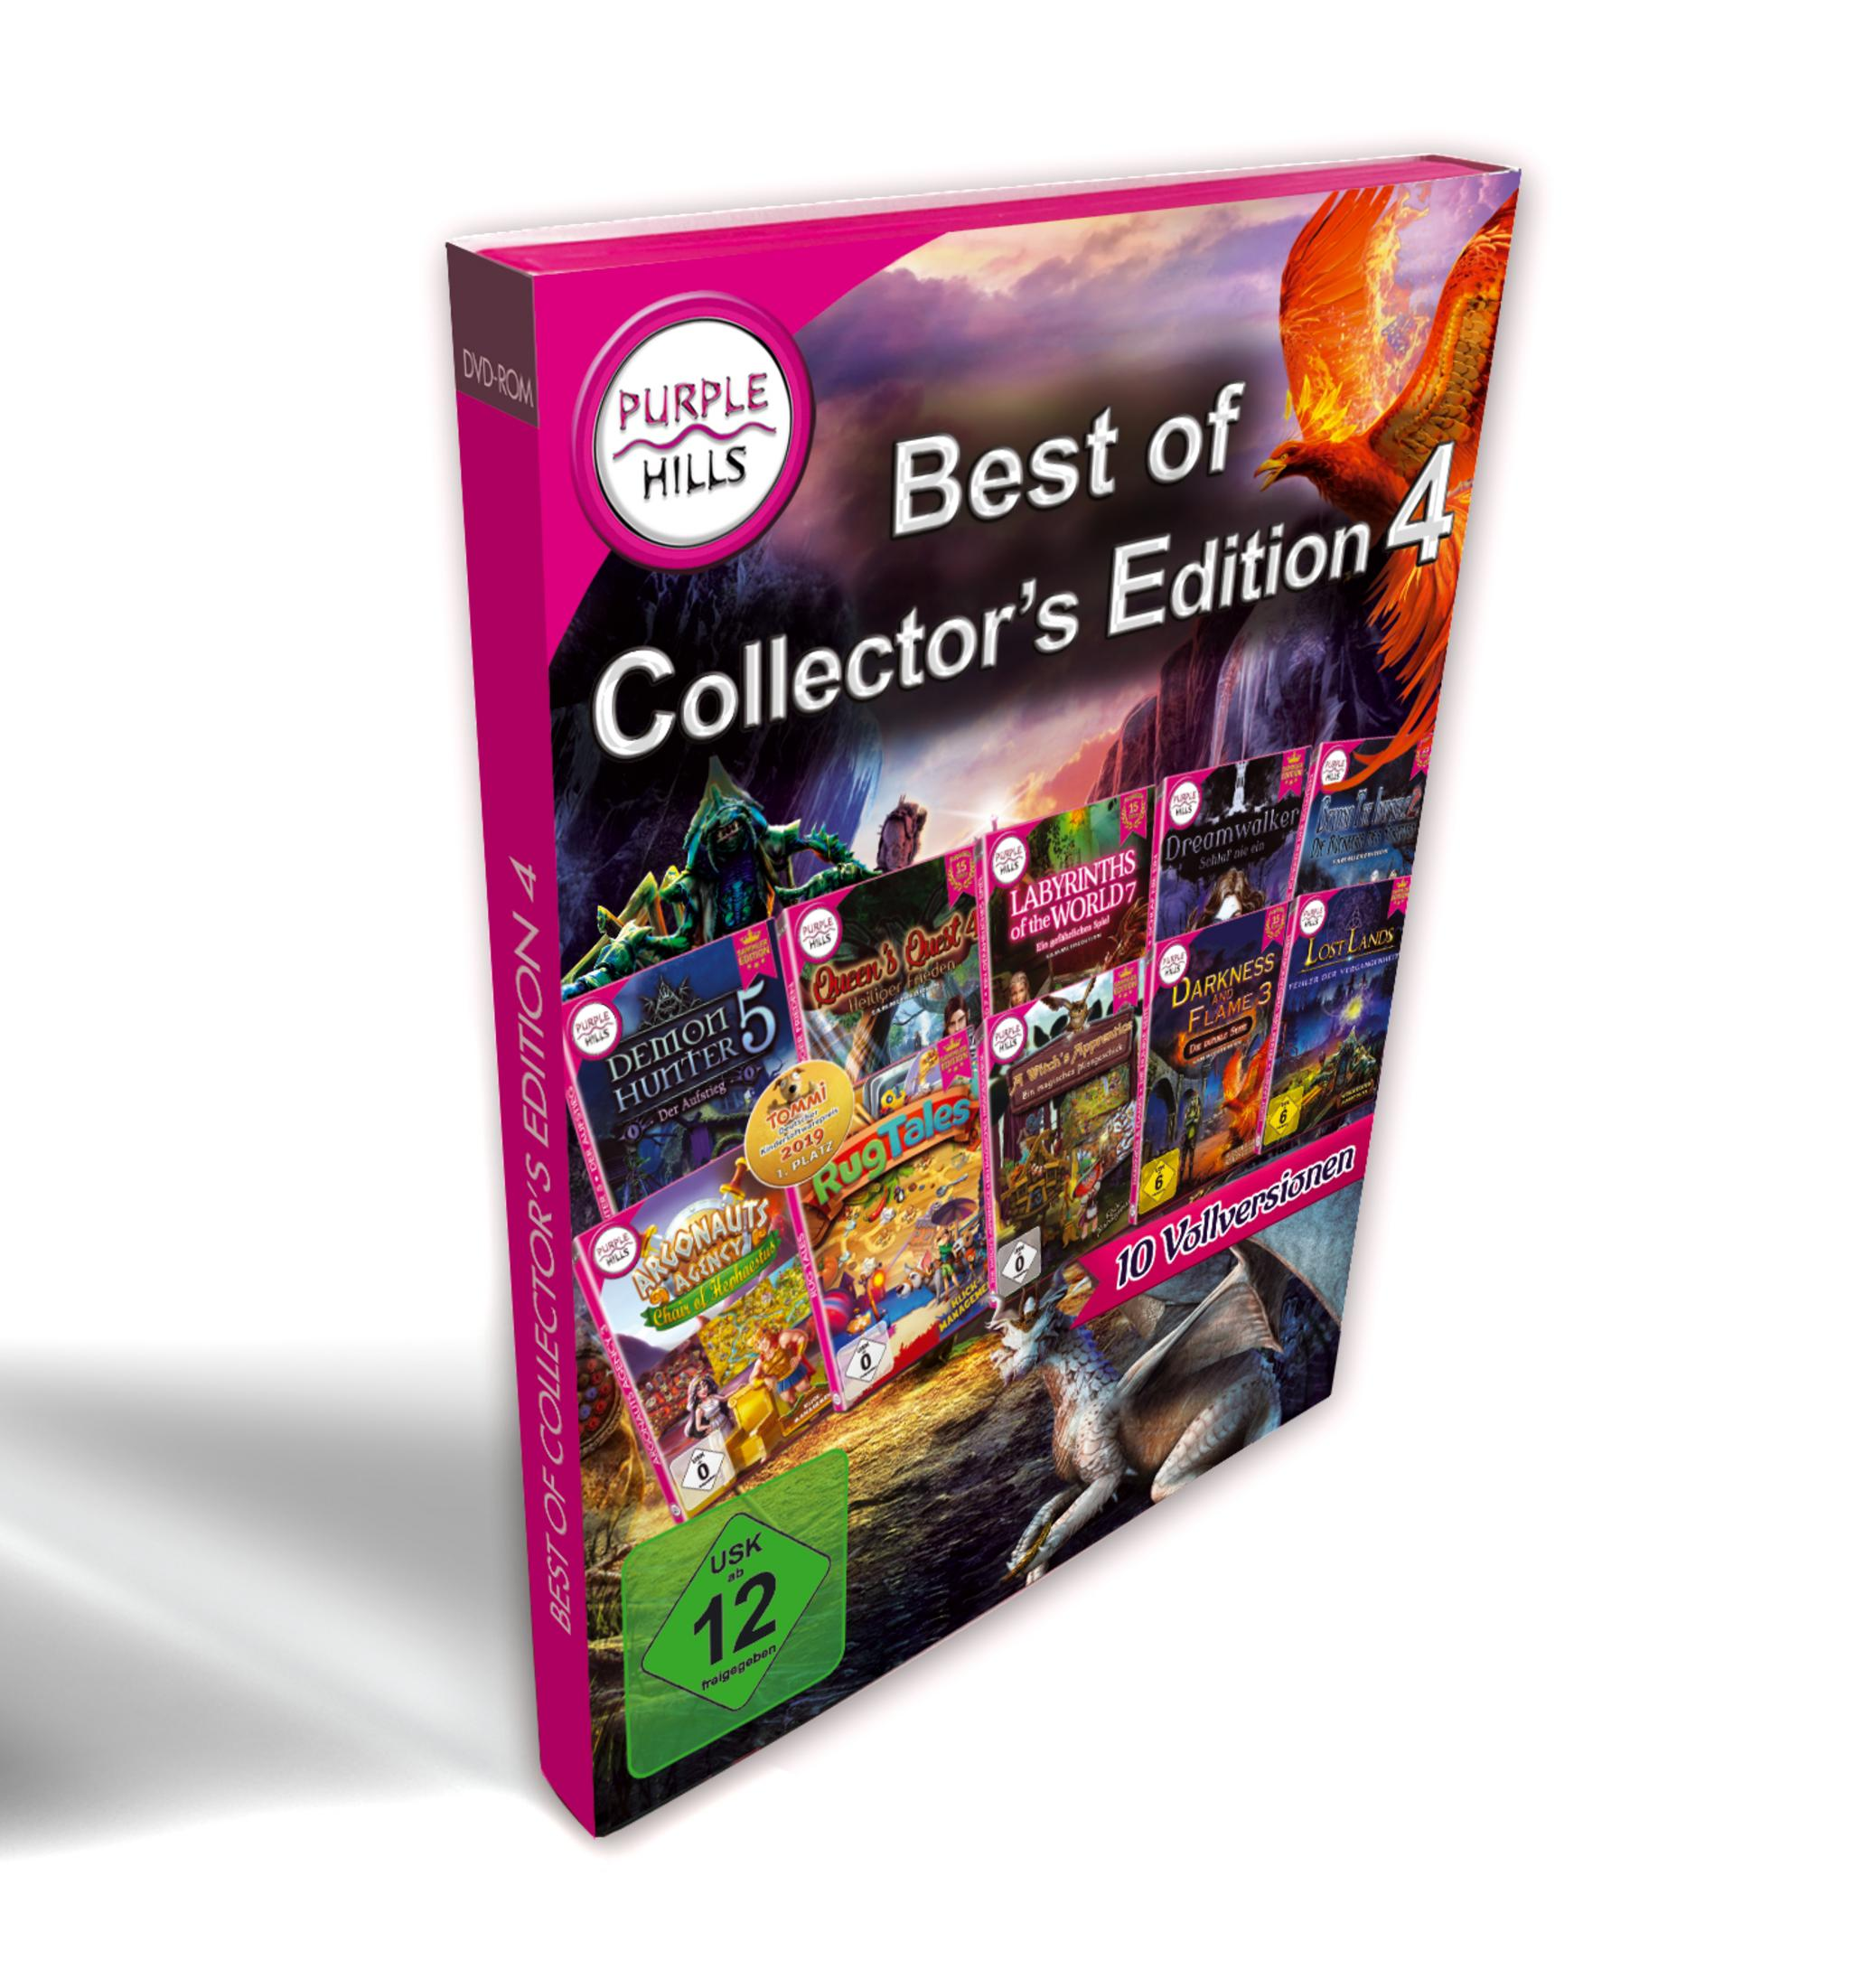 4 BEST S [PC] OF COLLECTOR EDITION -